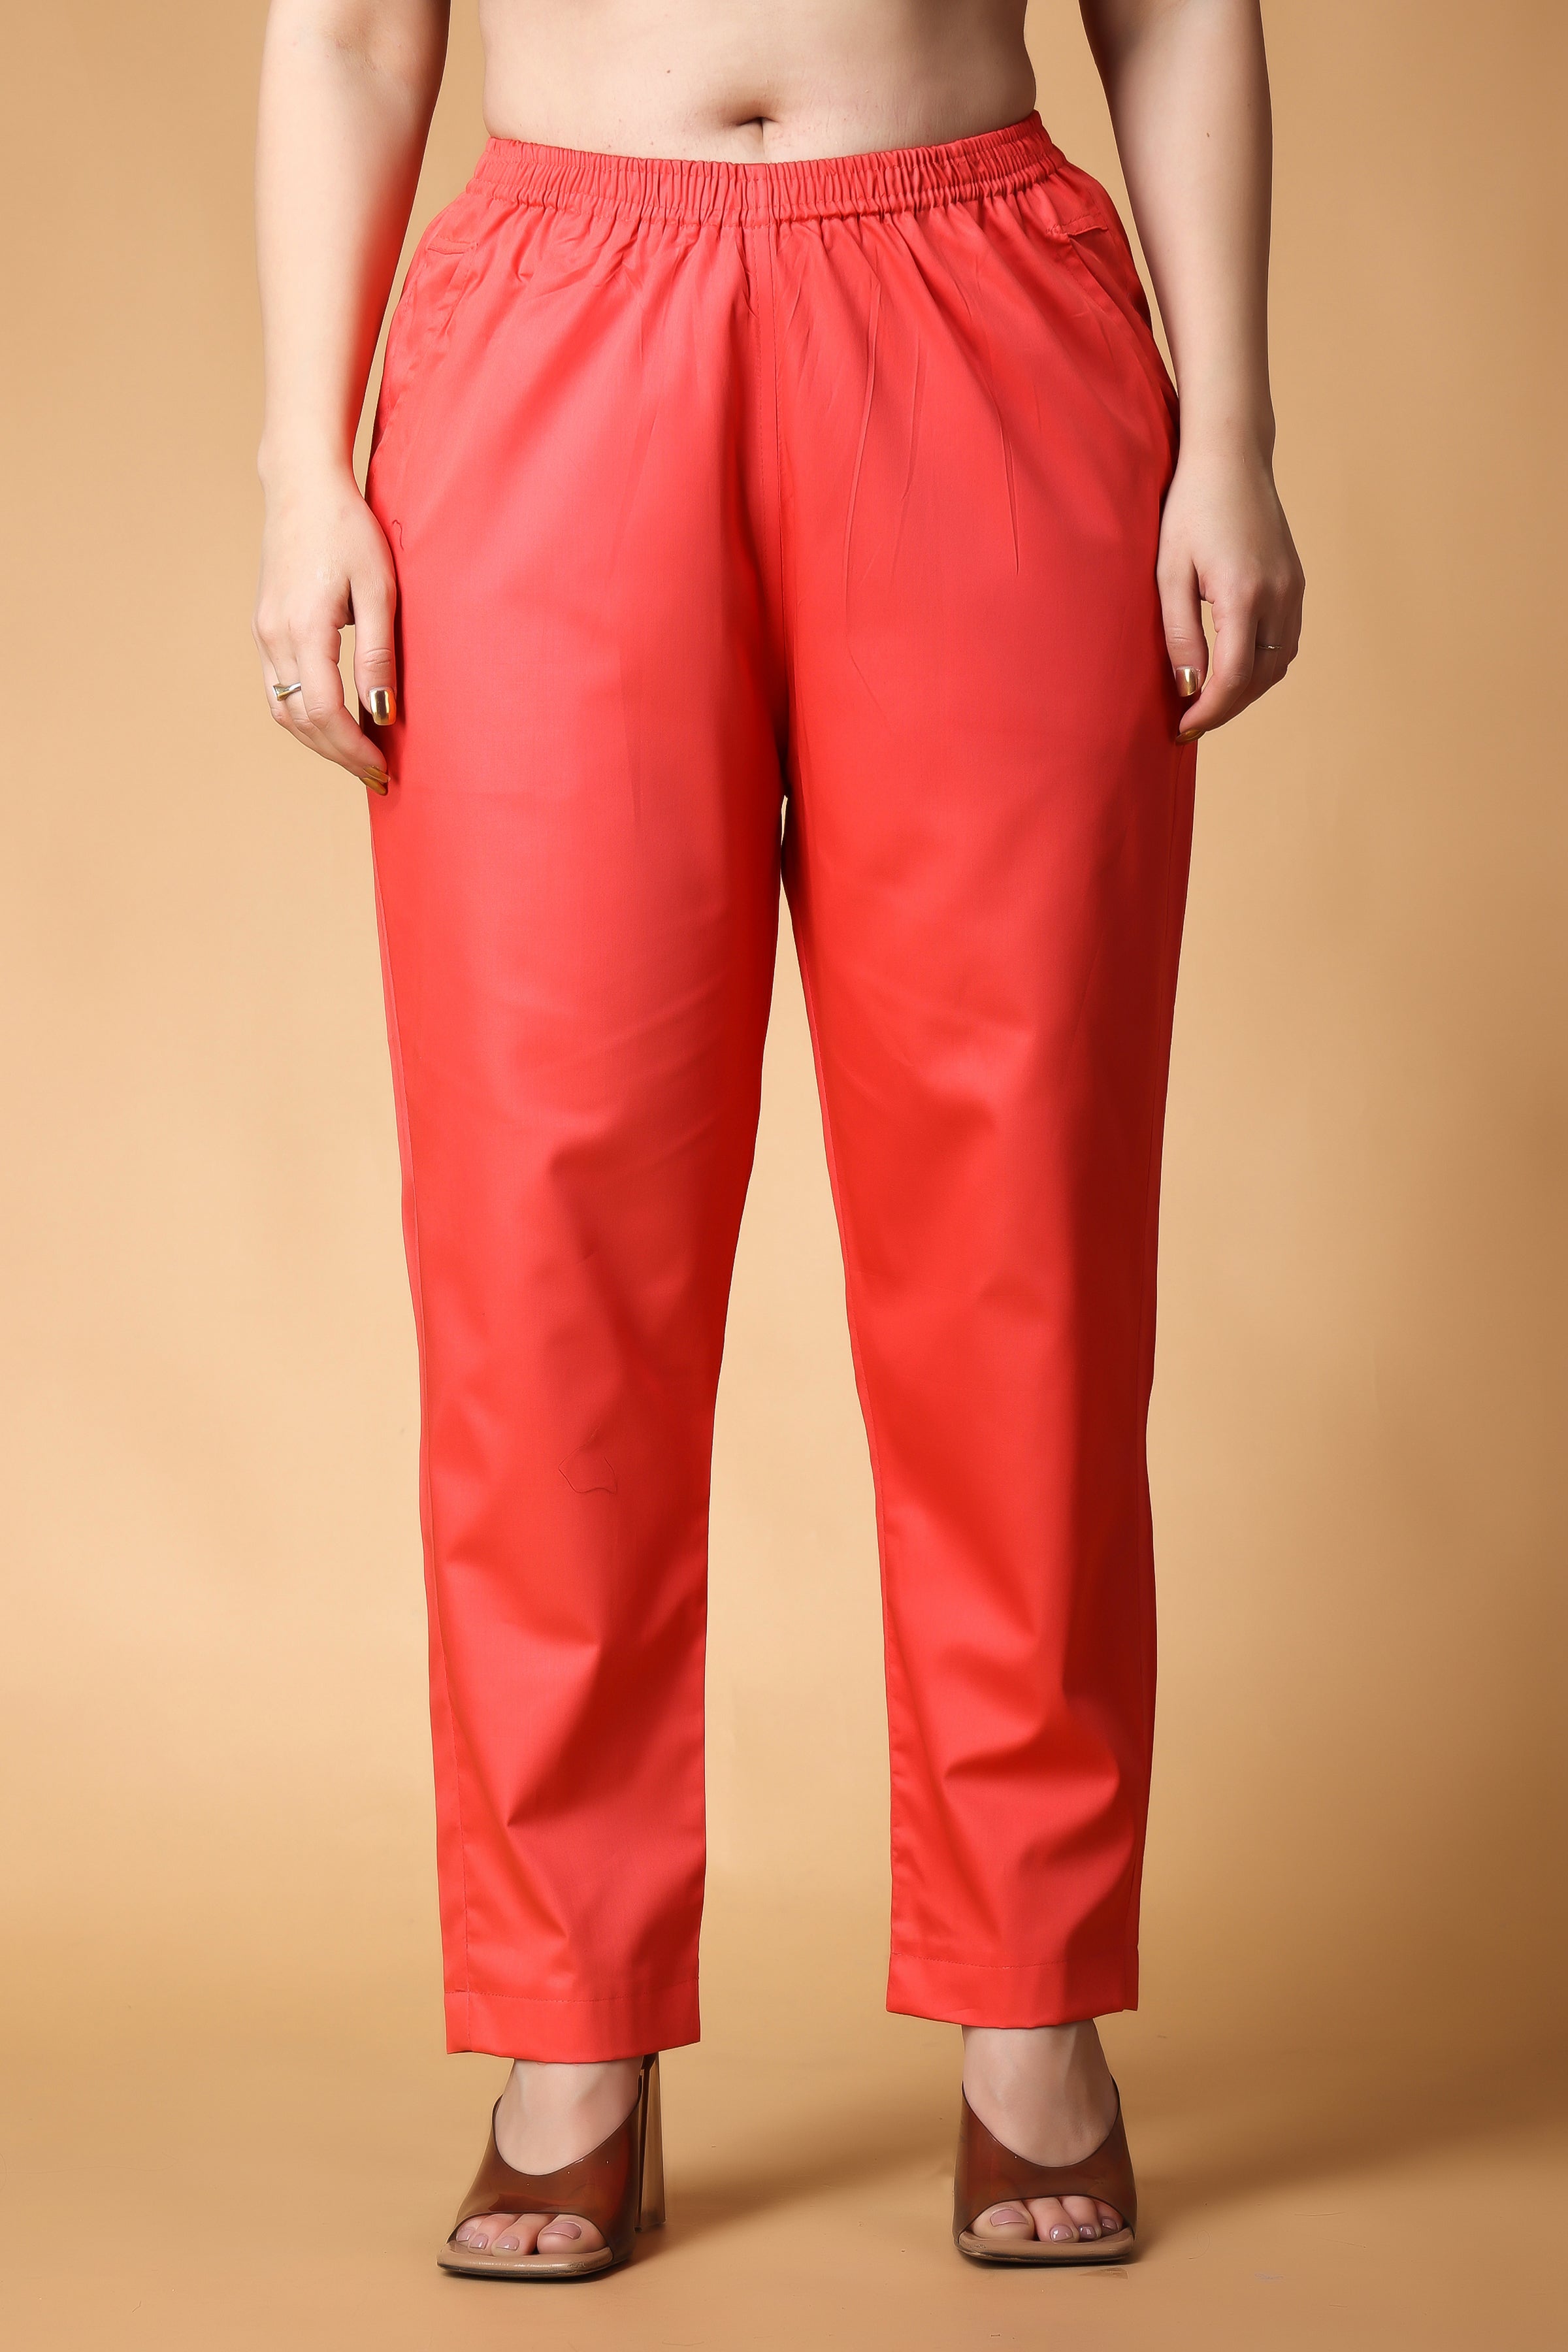 Female Cotton Regular Fit Women's Palazzo Pants for Girls at Rs 195 in Delhi